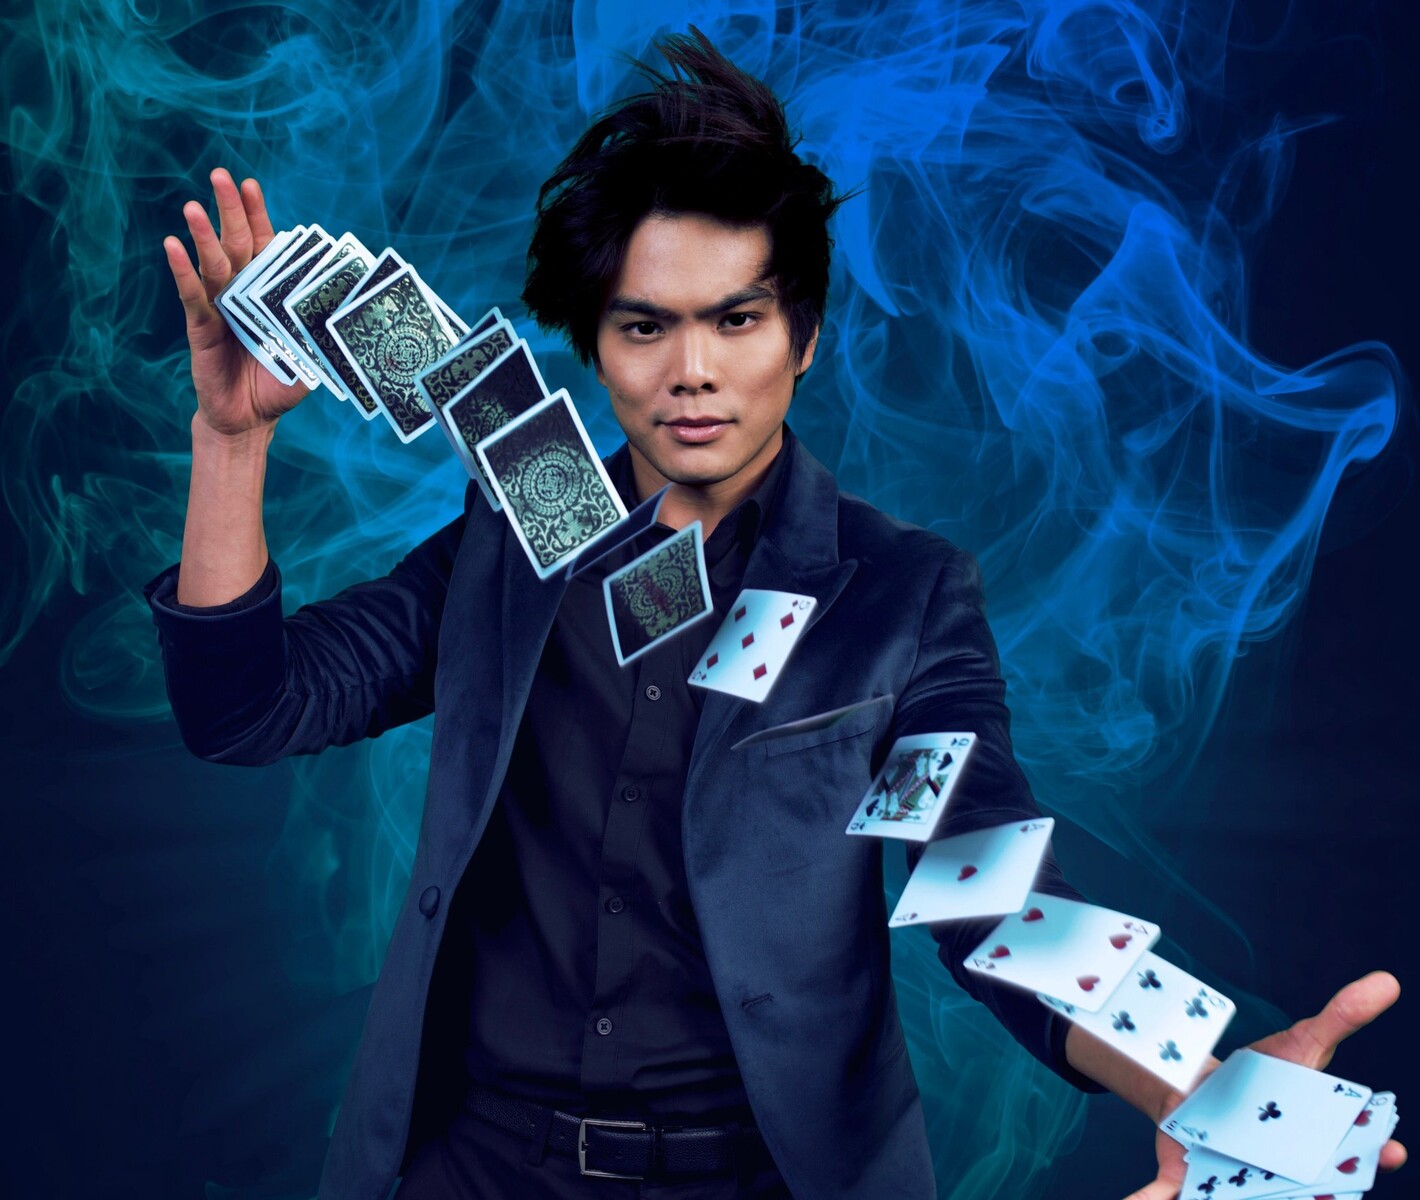 12 Captivating Facts About Shin Lim - Facts.net